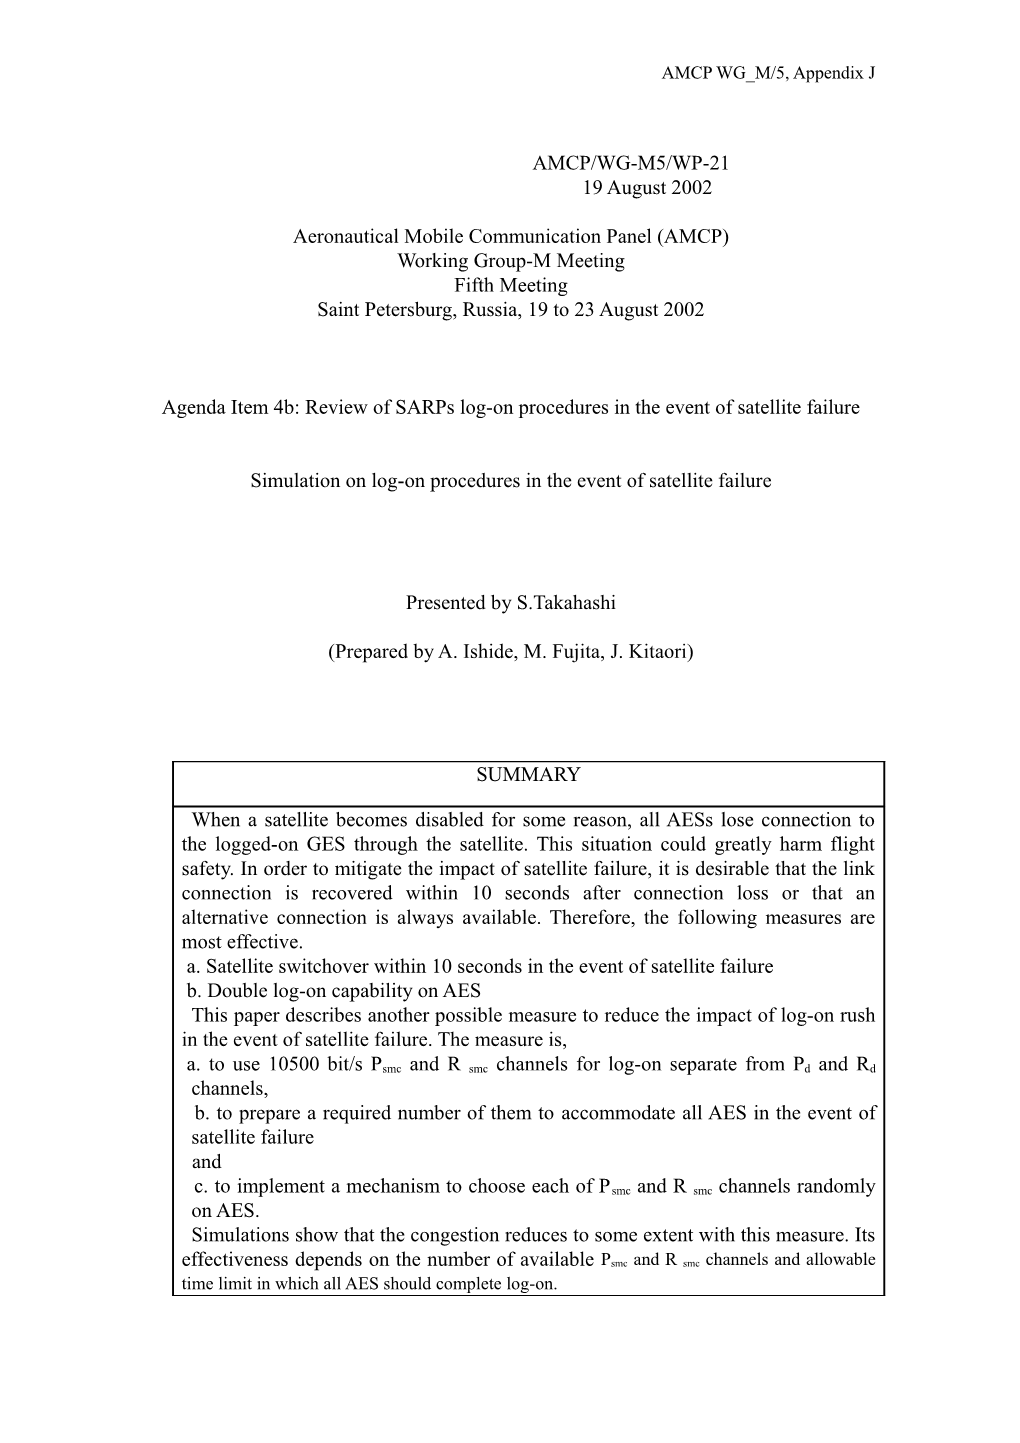 Log-On Procedures in the Event of a Satellite Failure (WP-21)